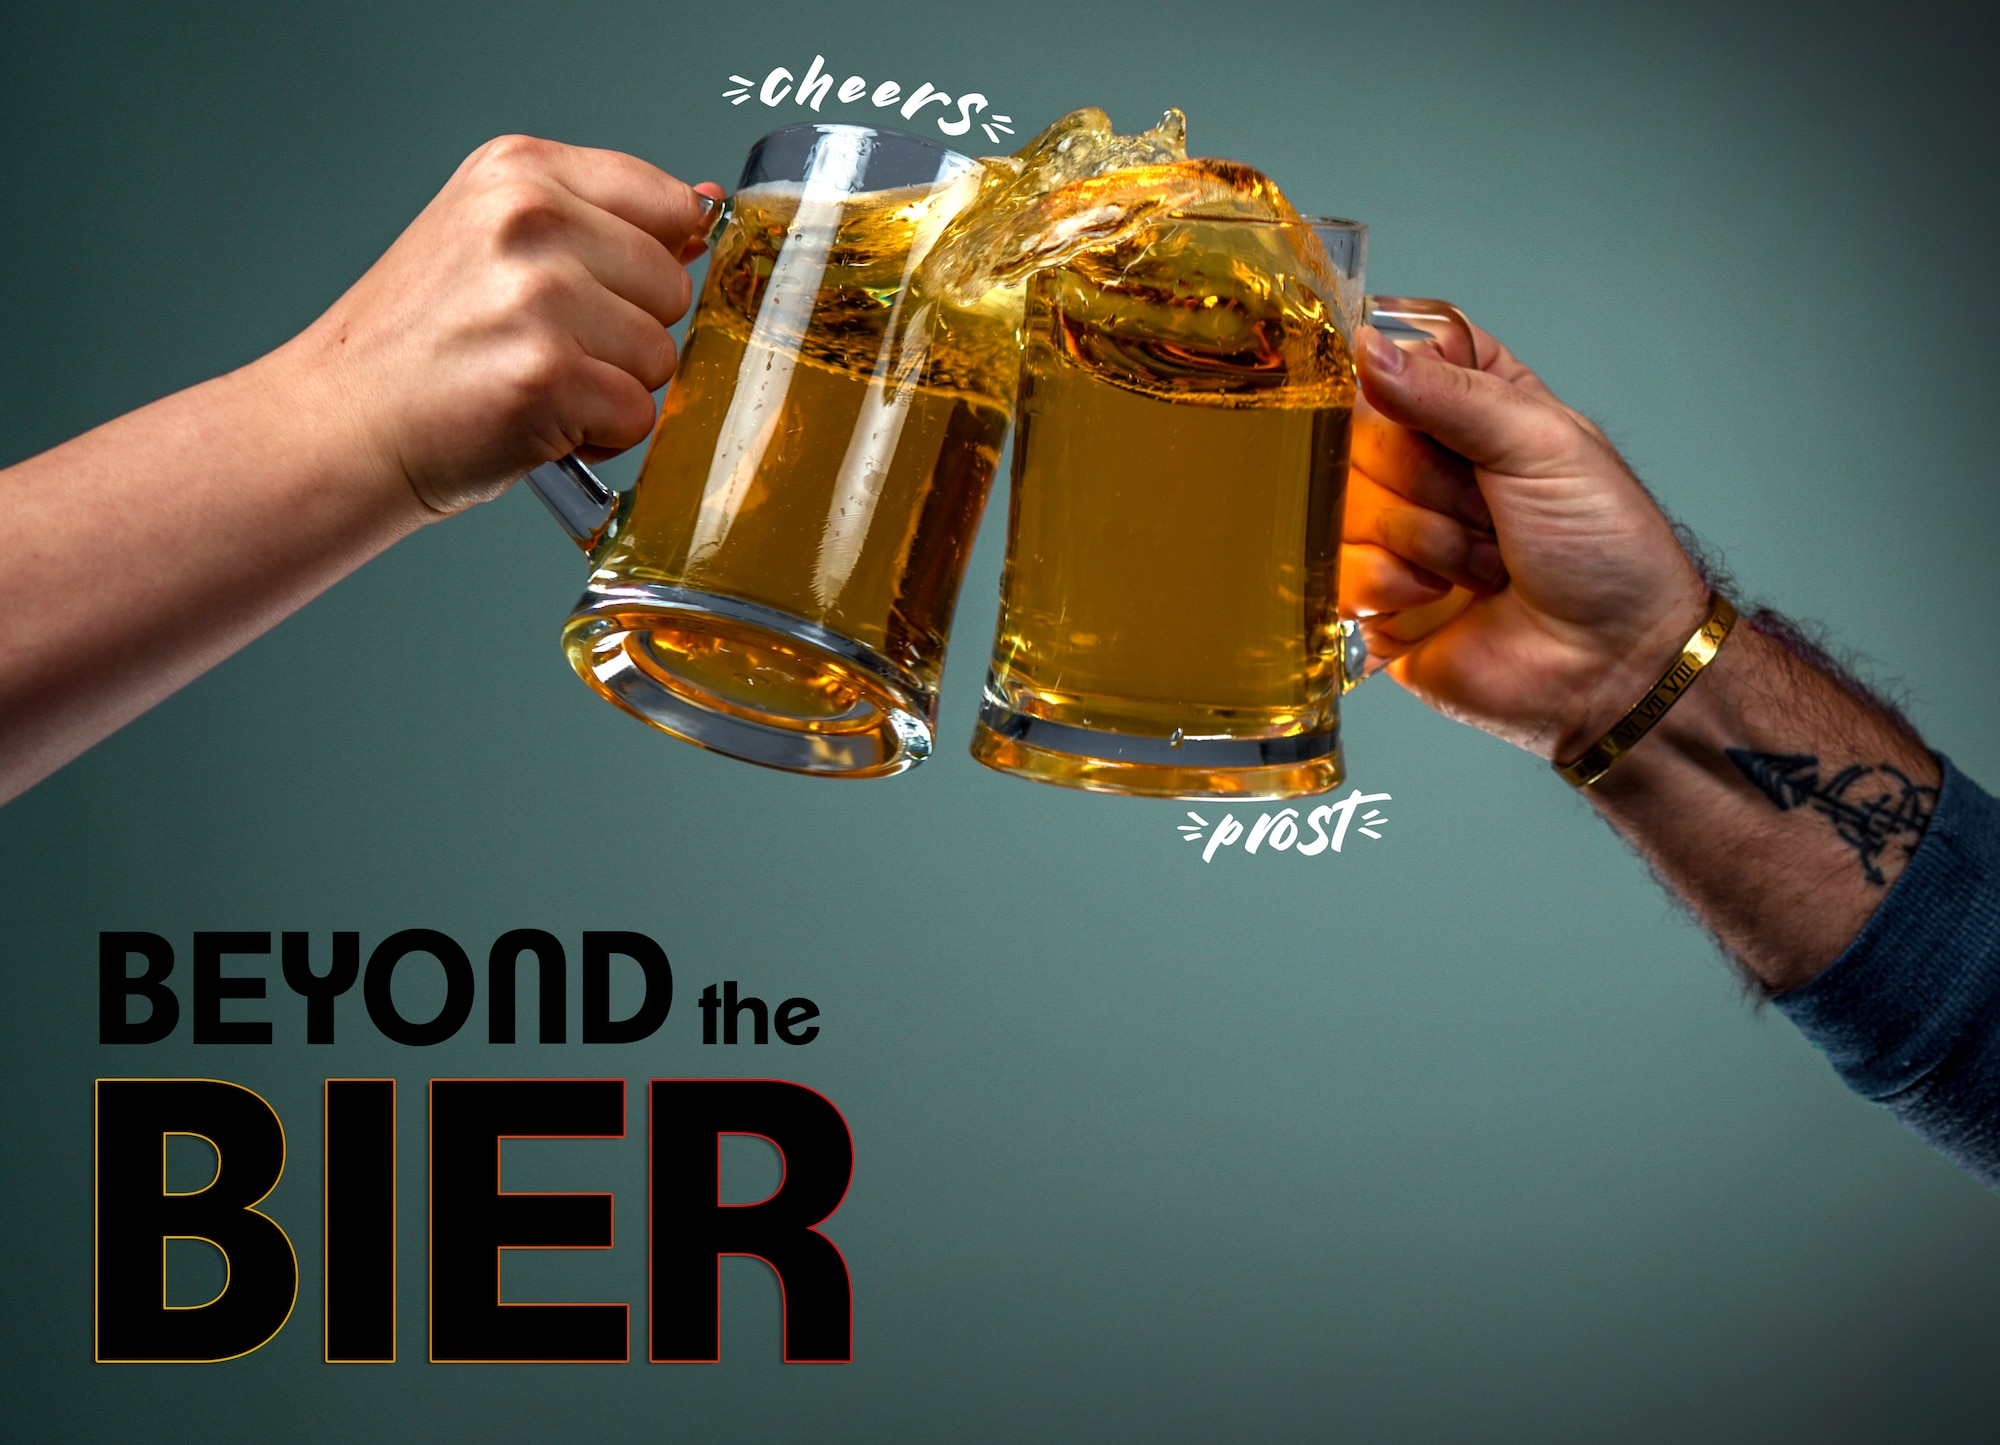 Beyond the Bier is a series highlighting German culture to assist U.S., and international, service members assimilate better into German culture.